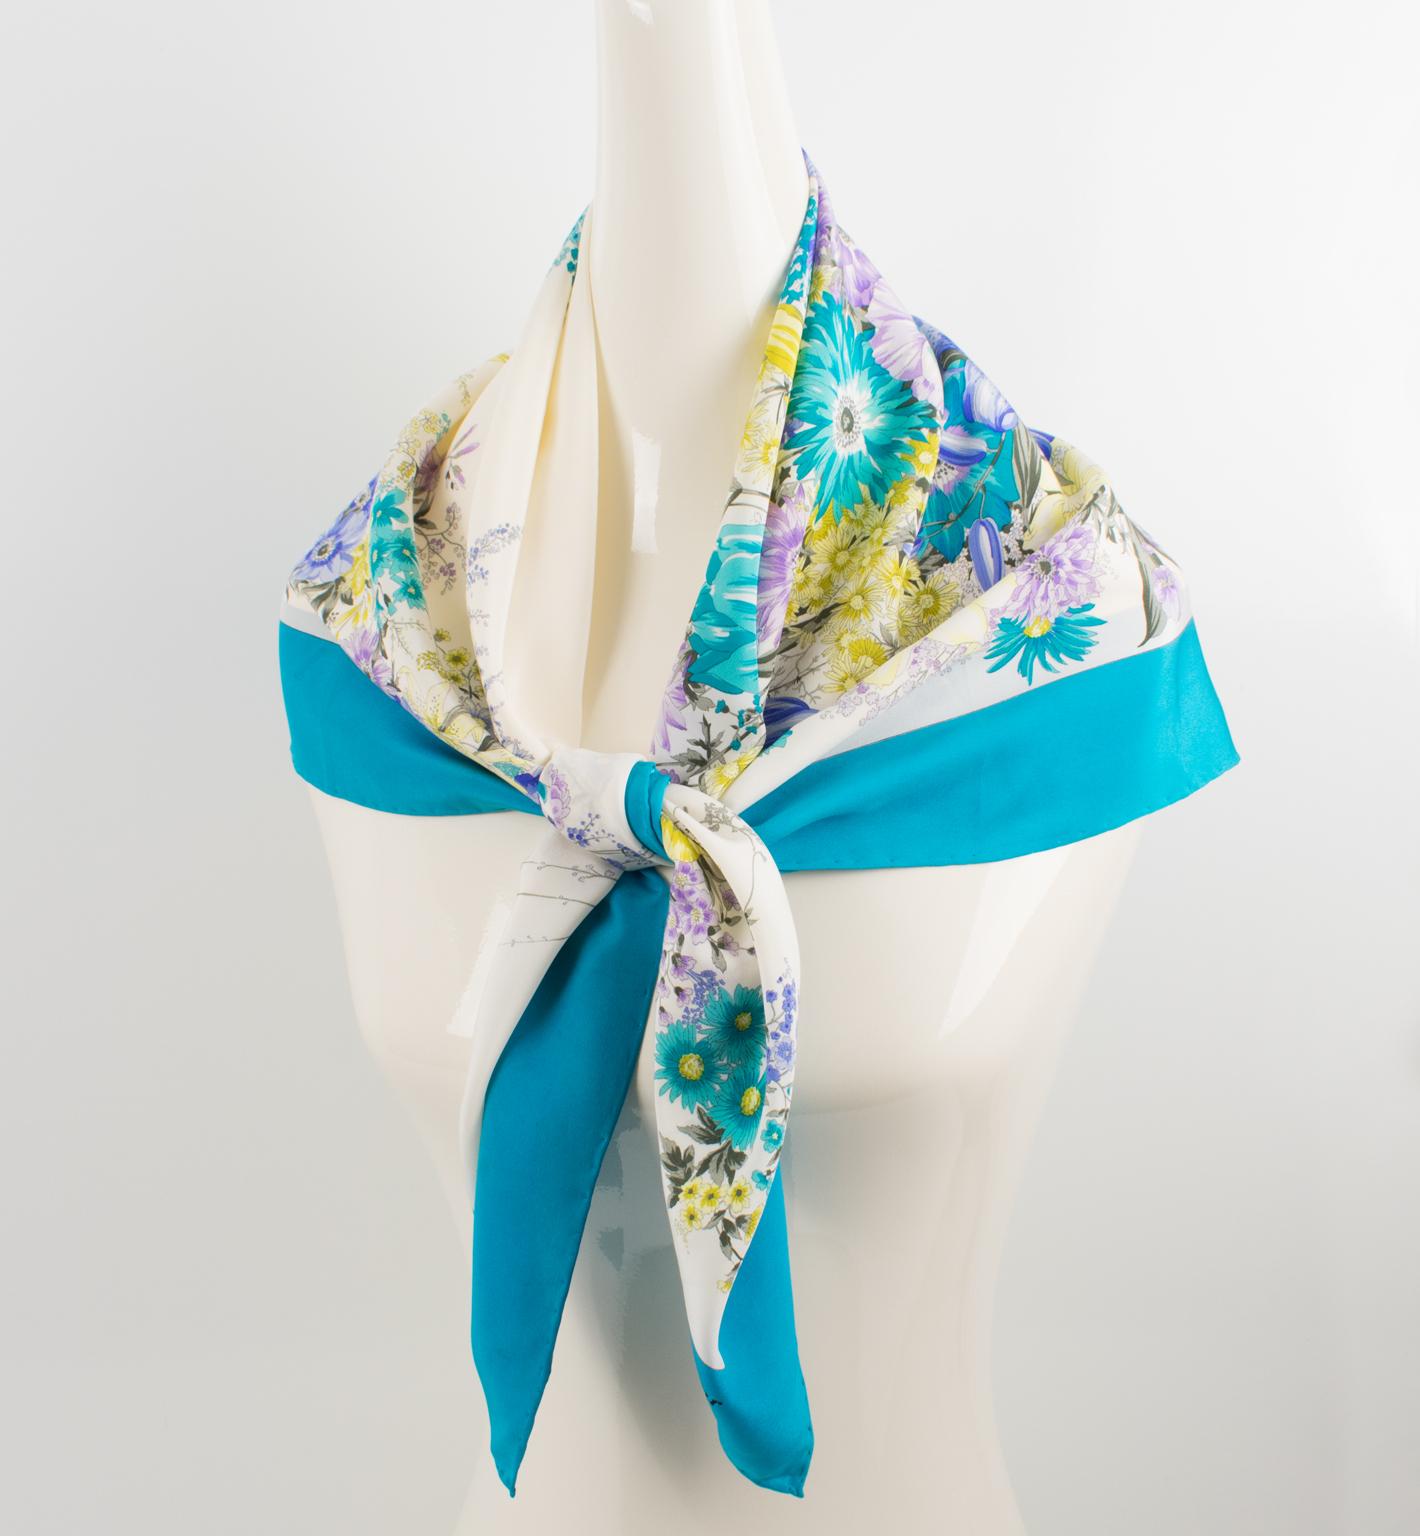 This elegant silk scarf by Christian Dior in blue and lavender colors features a floral design print. The Christian Dior's signature name is in the lower right corner. The combination of colors is bright and vibrant, with cerulean blue, purple